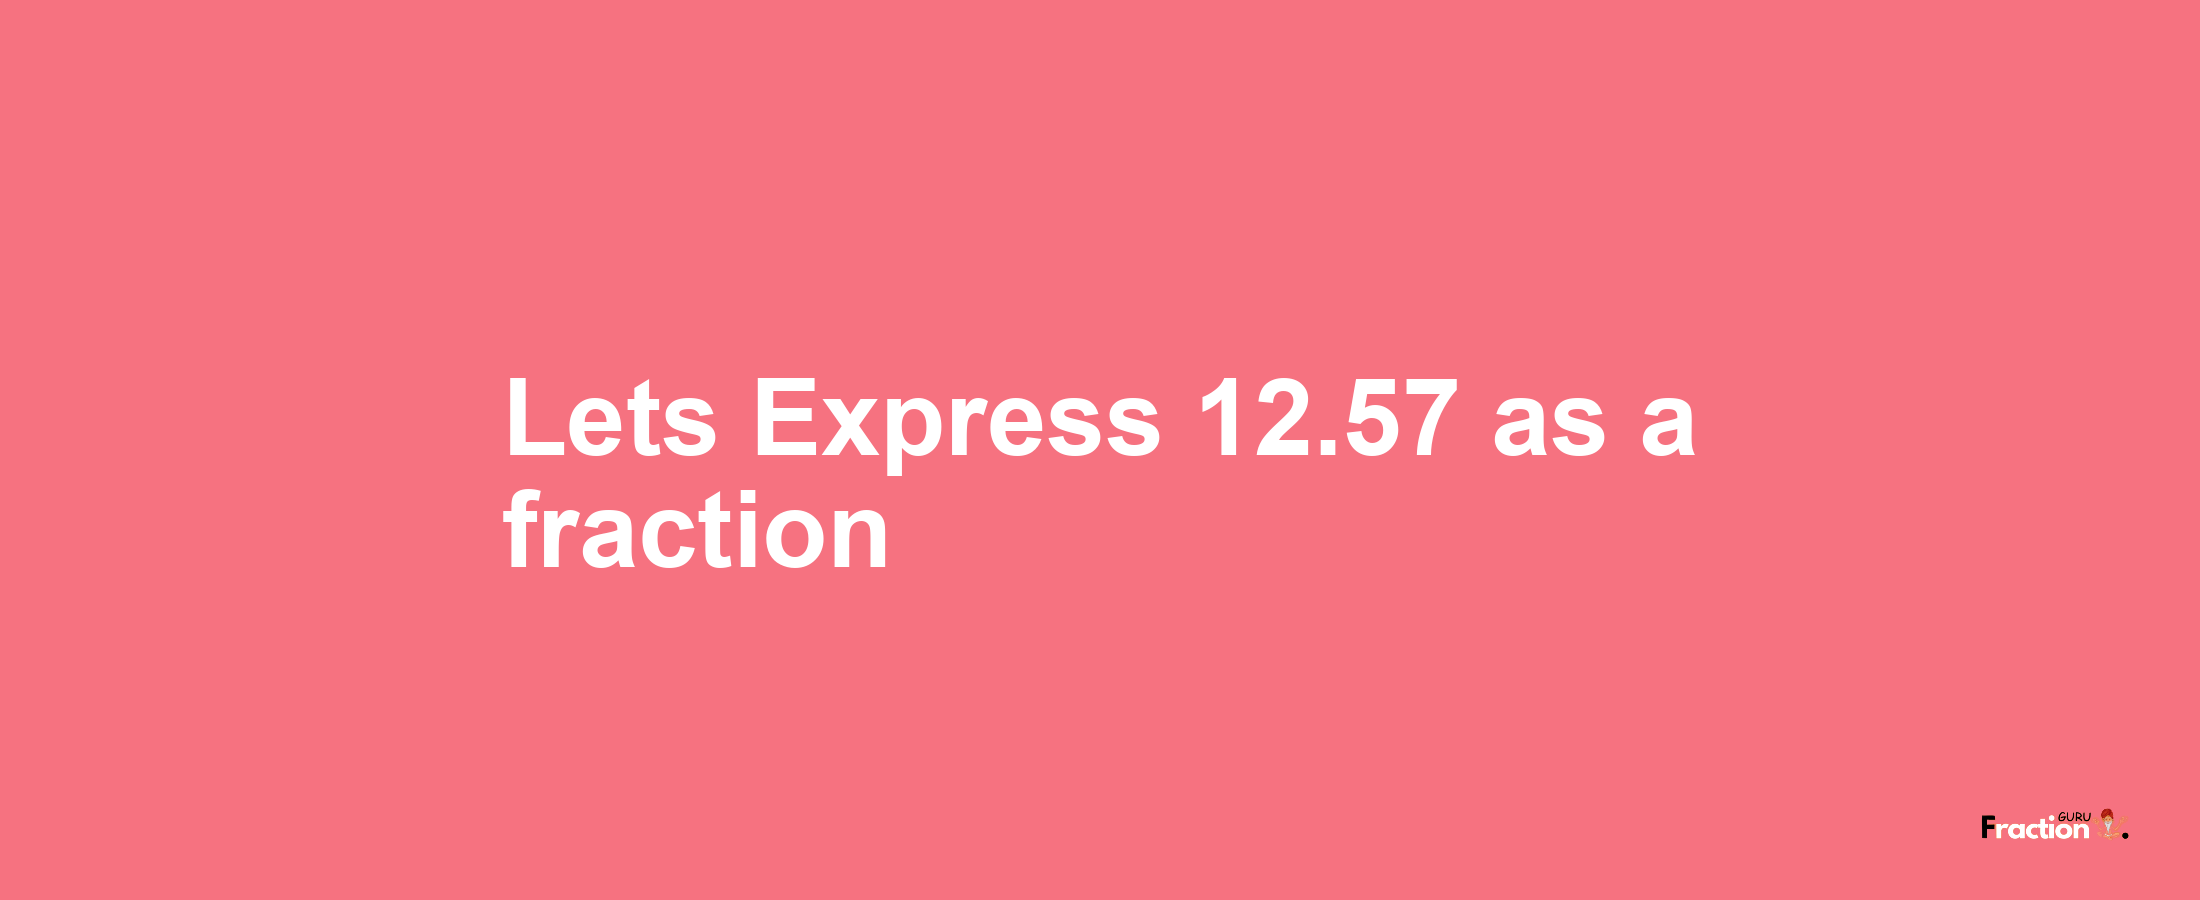 Lets Express 12.57 as afraction